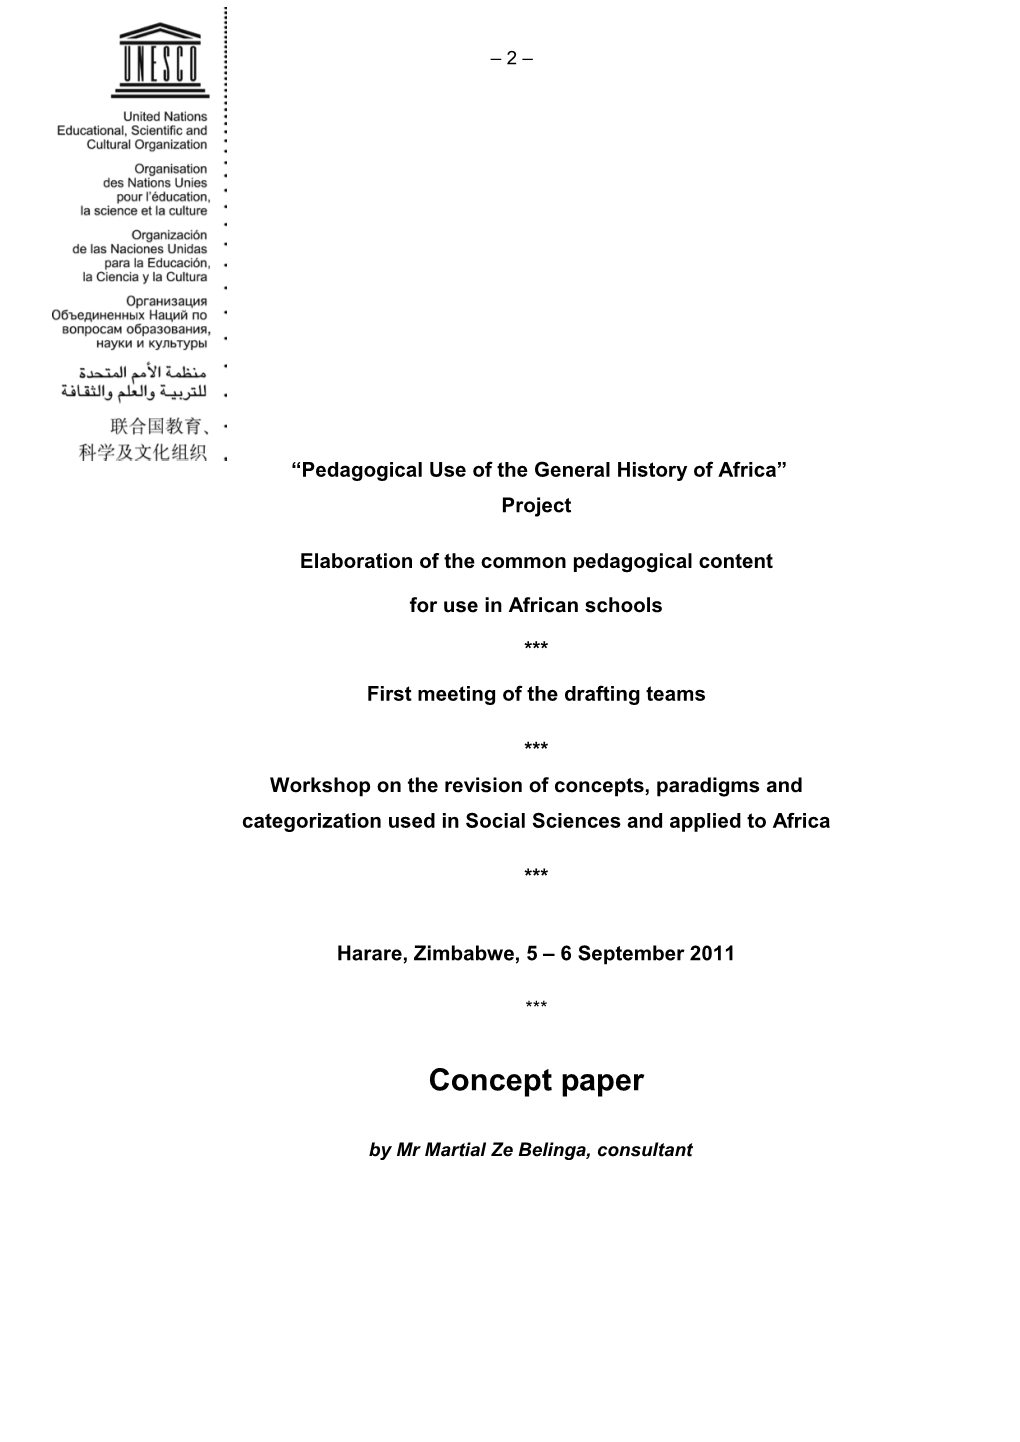 "Pedagogical Use of the General History of Africa"